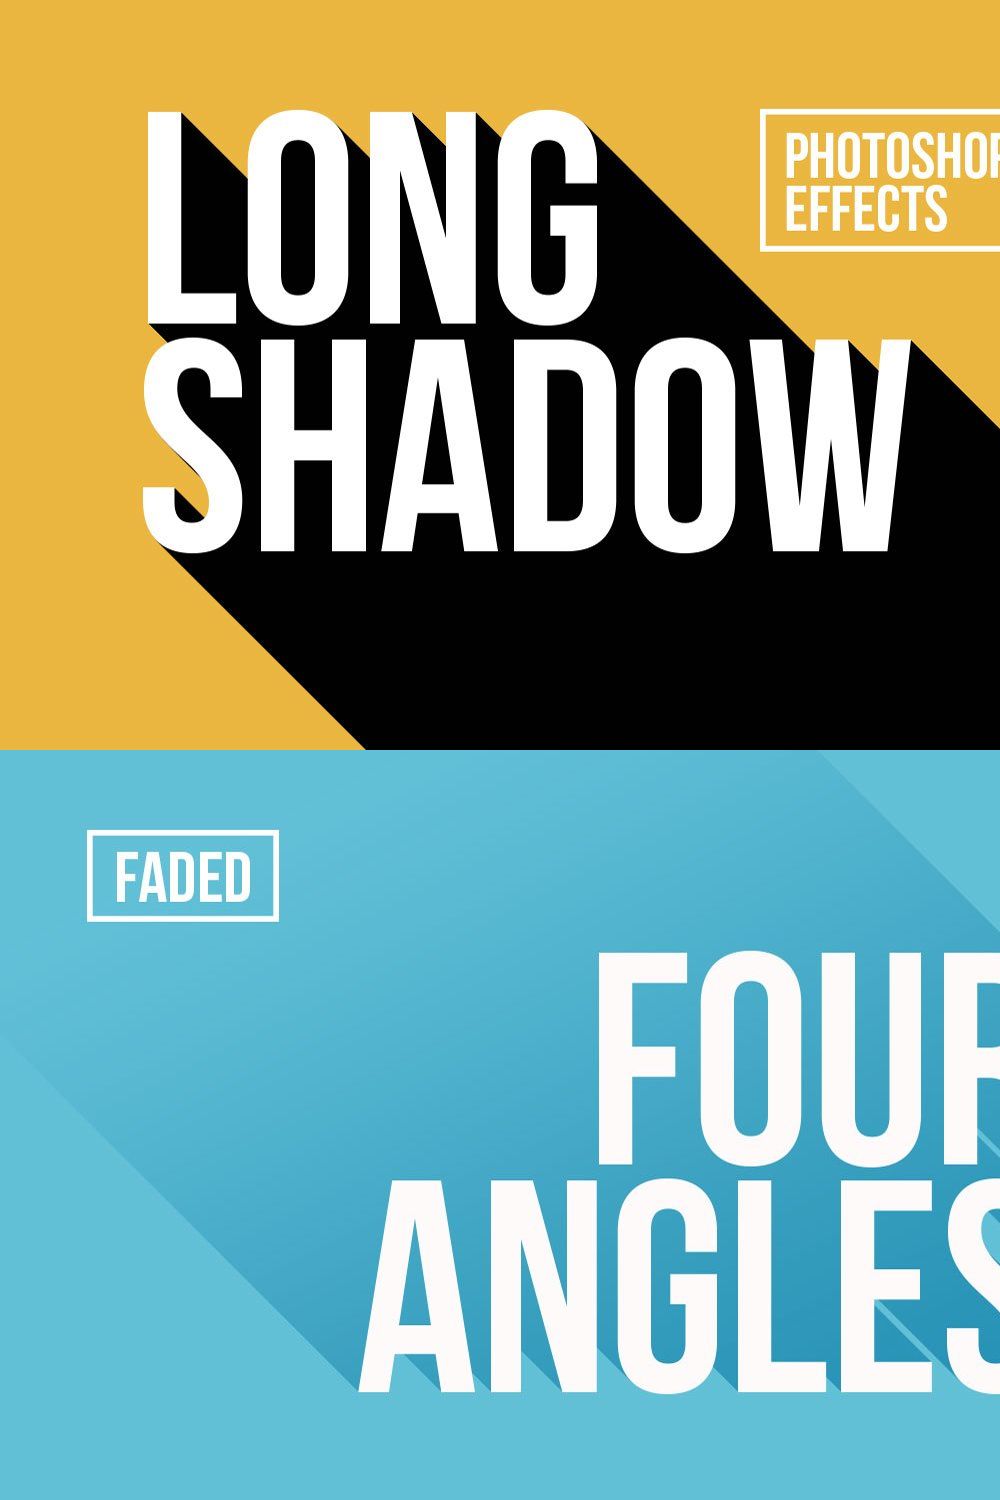 Long Shadow Photoshop Effects pinterest preview image.